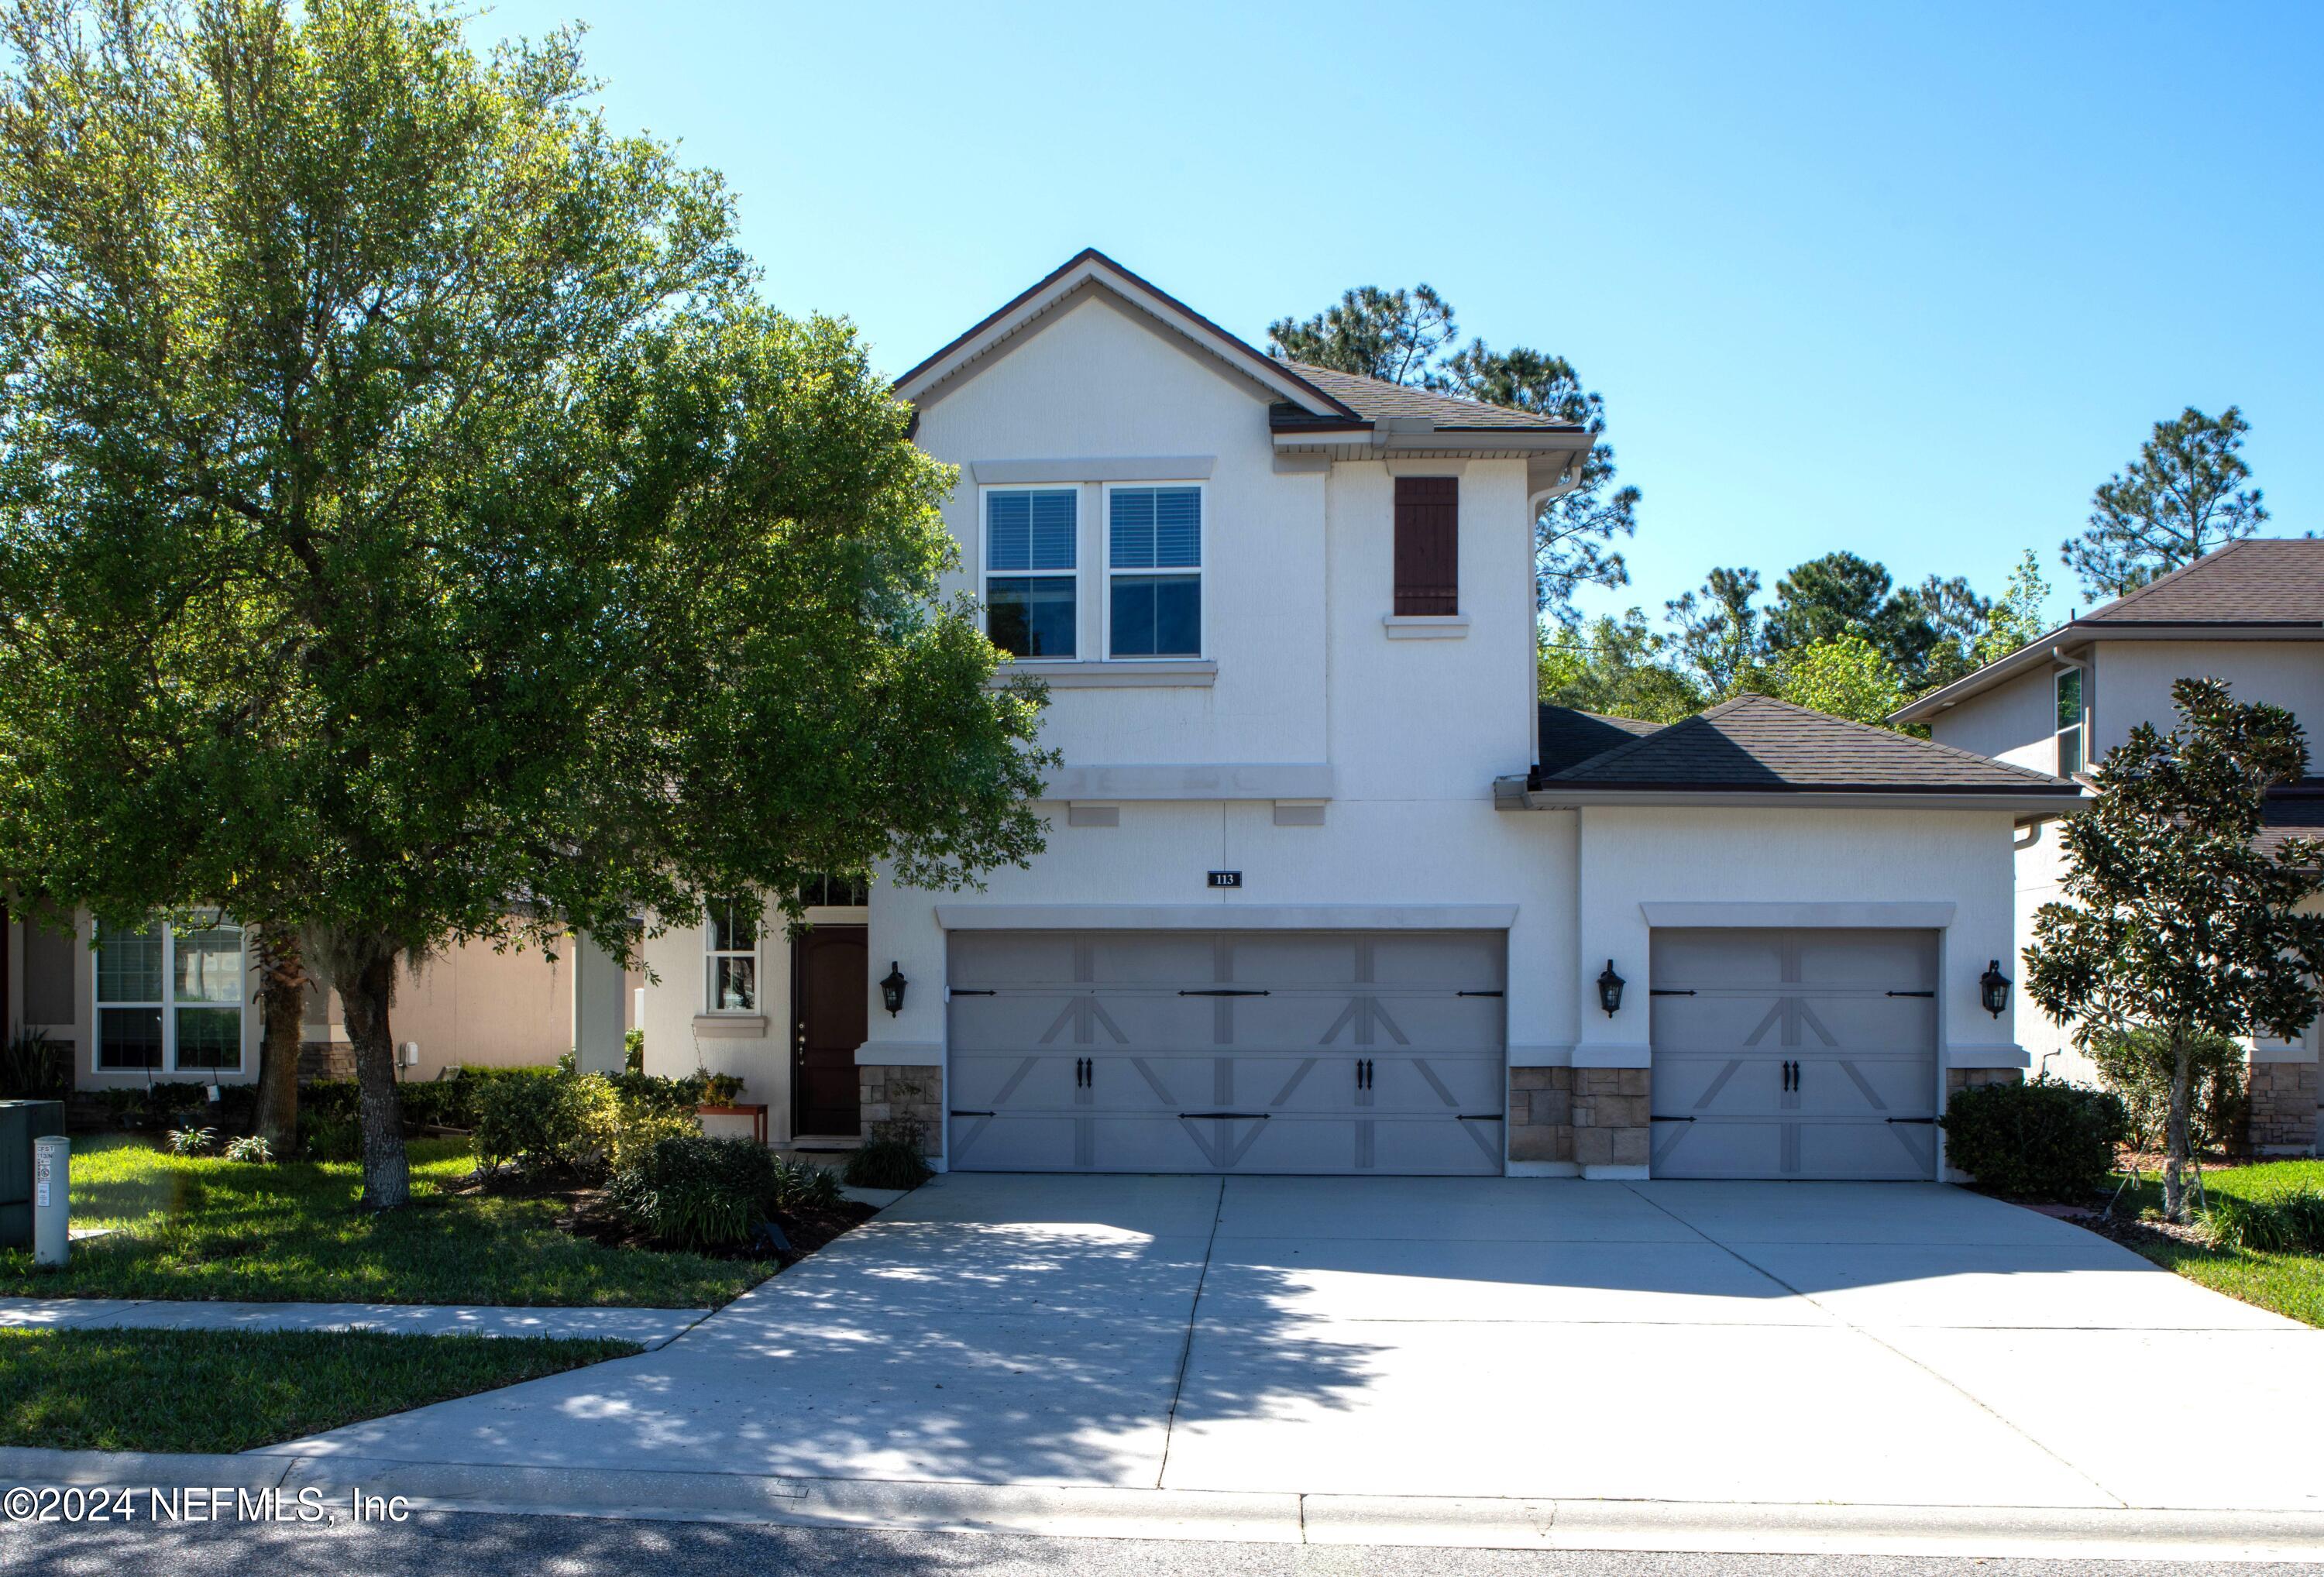 St Johns, FL home for sale located at 113 N Torwood Drive, St Johns, FL 32259